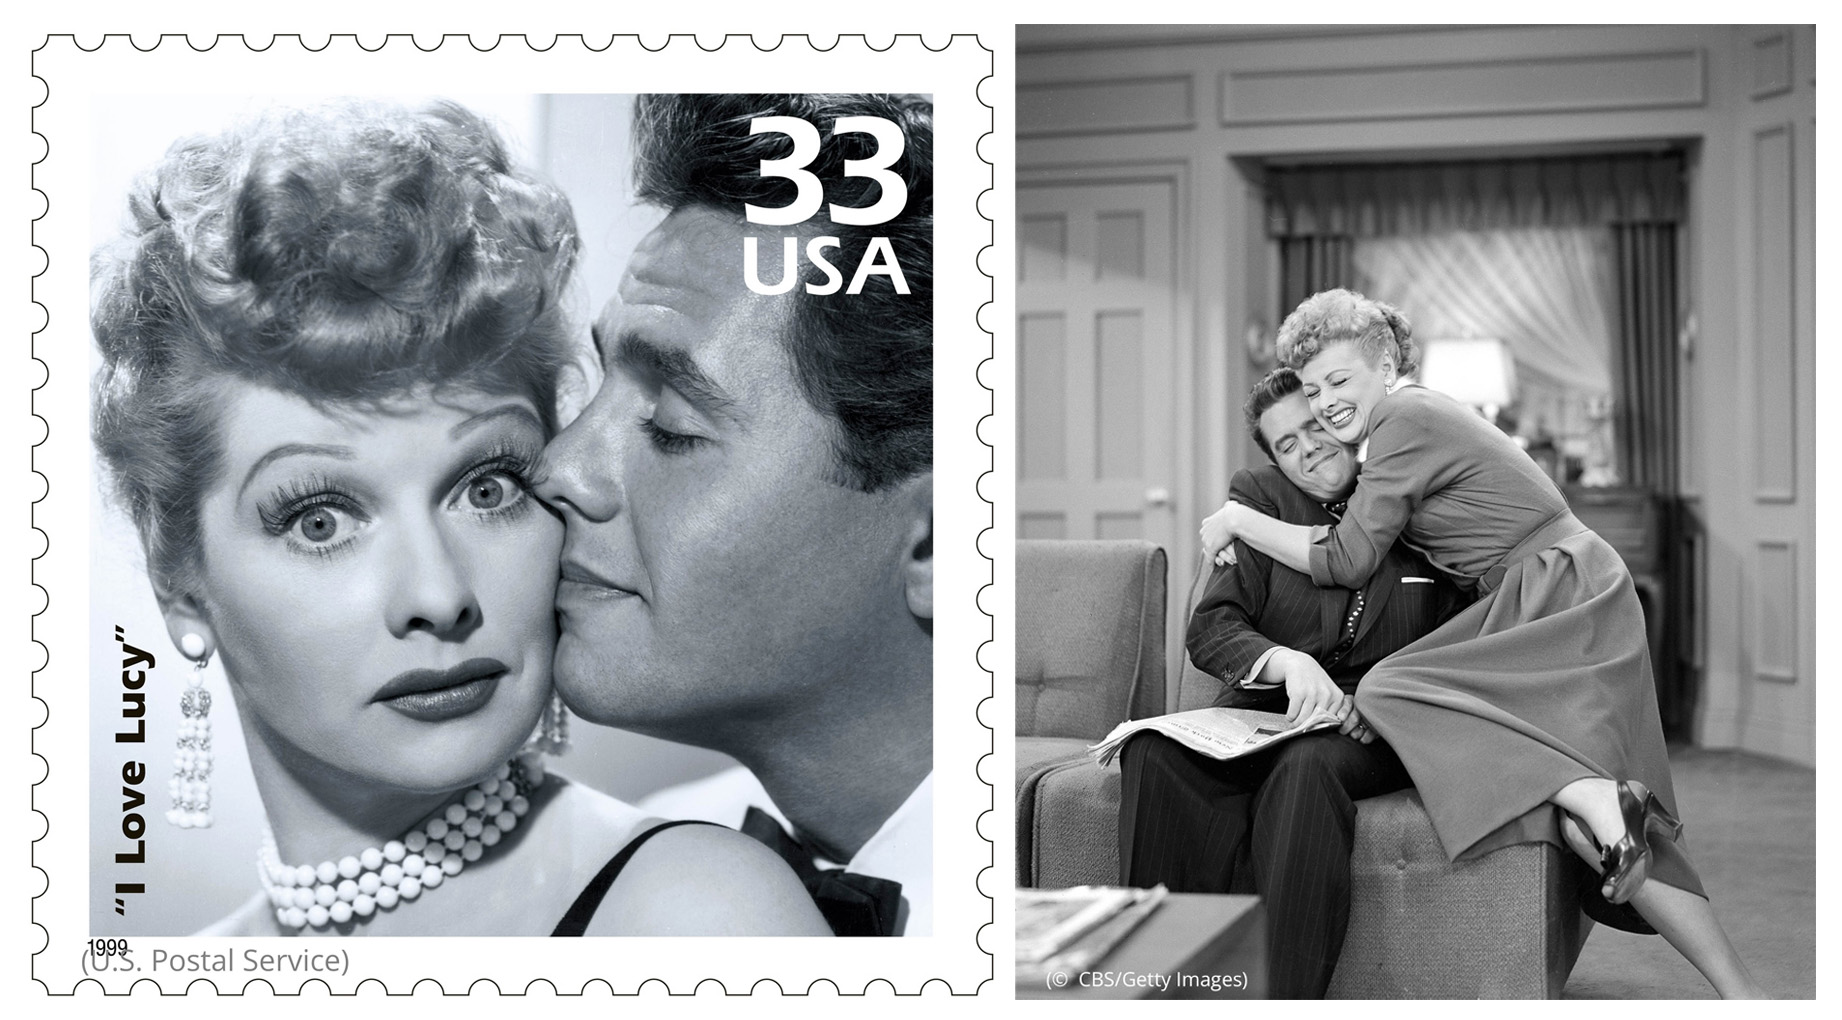 Left image: 'I Love Lucy' stamp (U.S. Postal Service) Right photo: Woman embracing seated man (© CBS/Getty Images)